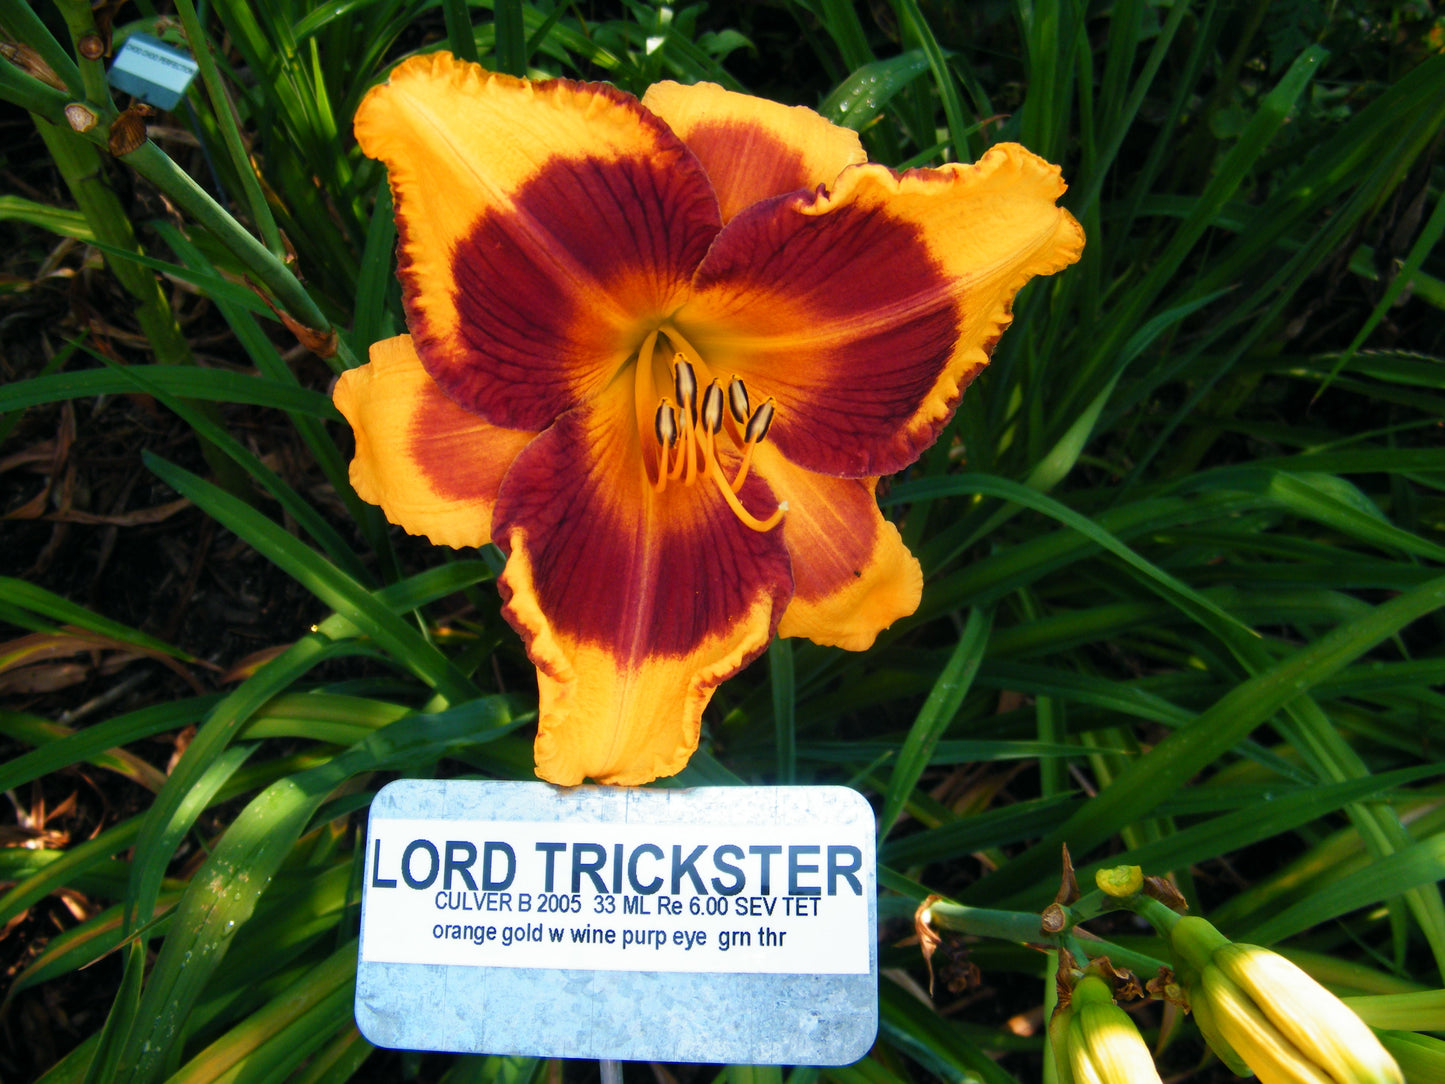 LORD TRICKSTER